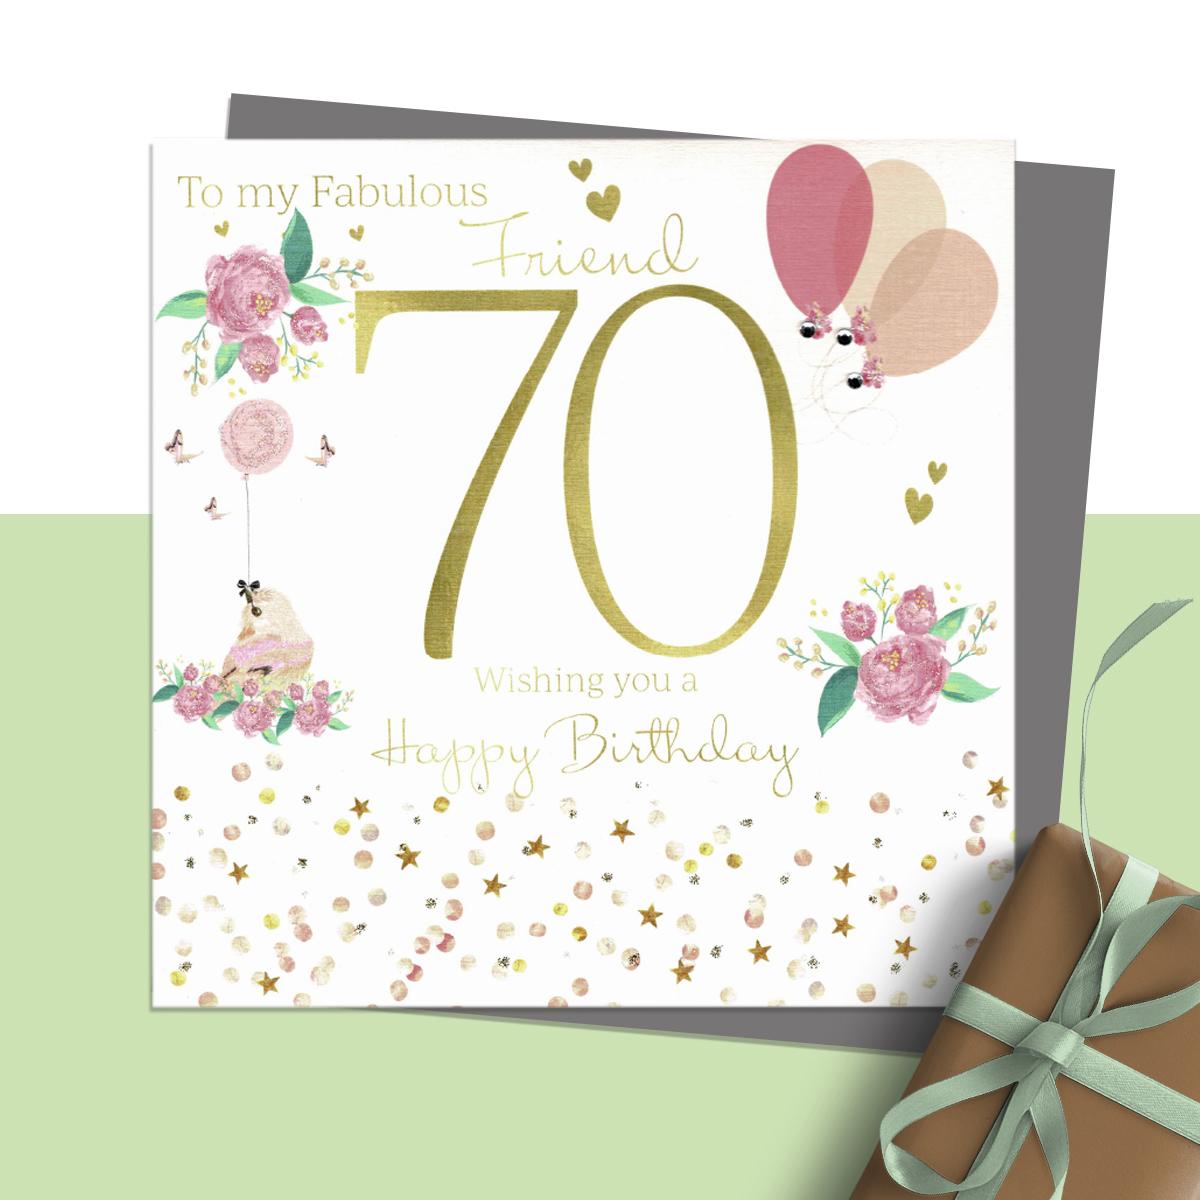 ' To My Fabulous Friend 70 Wishing You A Happy Birthday ' Featuring Flowers, Birds And Balloons. Hand Finished With Sparkle And Jewel Embellishments. Blank Inside For Own Message. Complete With Silver Coloured Envelope